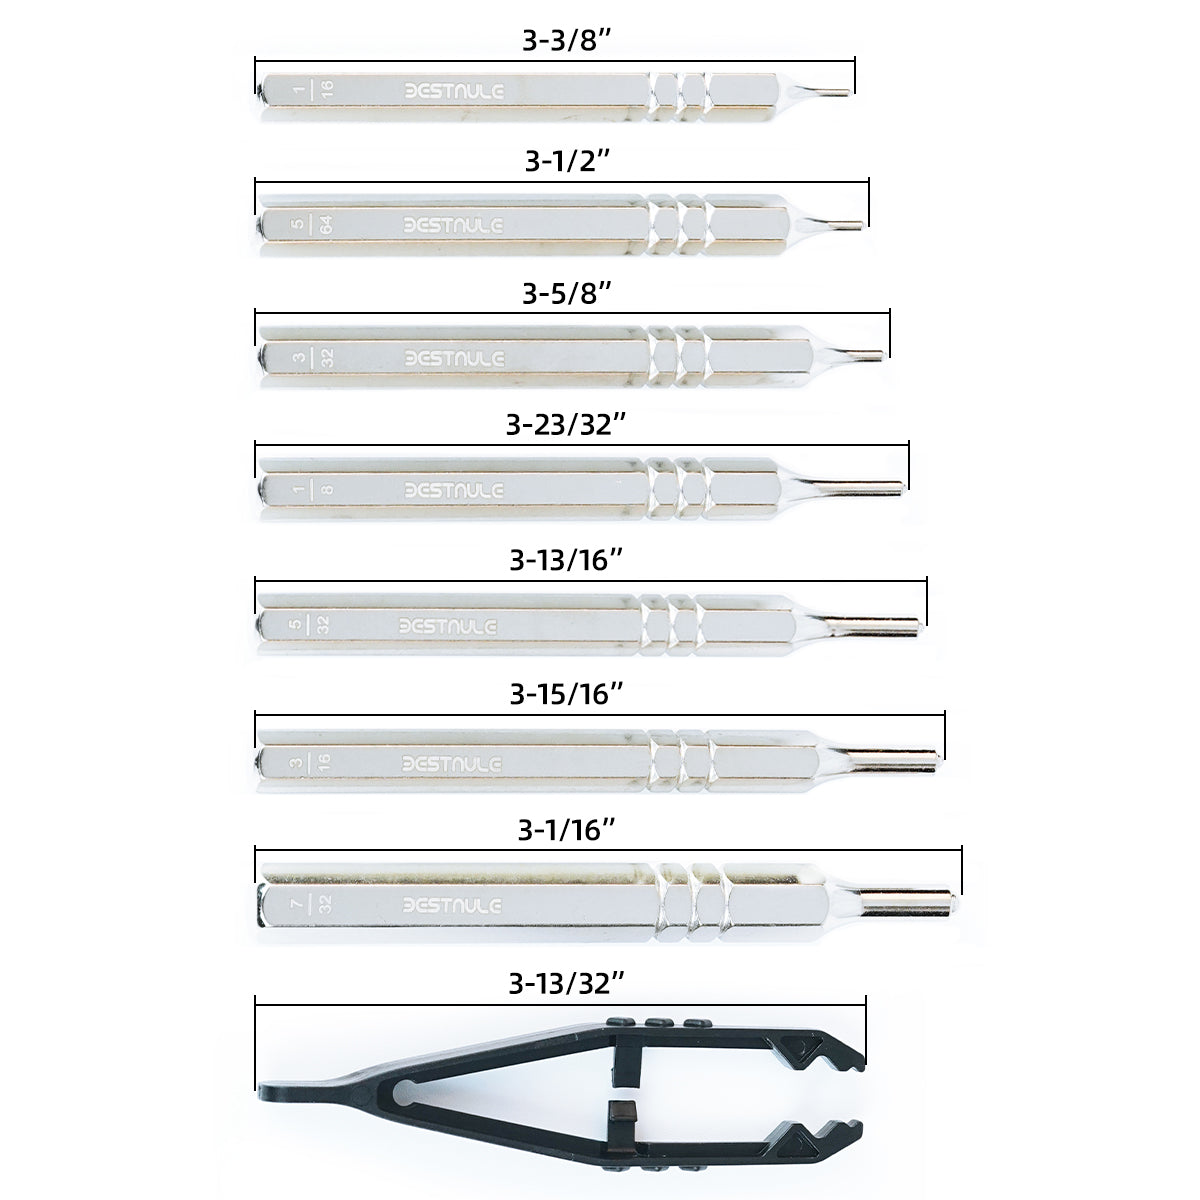 BESTNULE 8 Piece Punch Set, Punch Set, Roll Pin Punch Set, Punch Tools with 1 Metal Tweezers, Made of Solid Material Including Steel Punch and Tweezer, Ideal for Machinery Maintenance